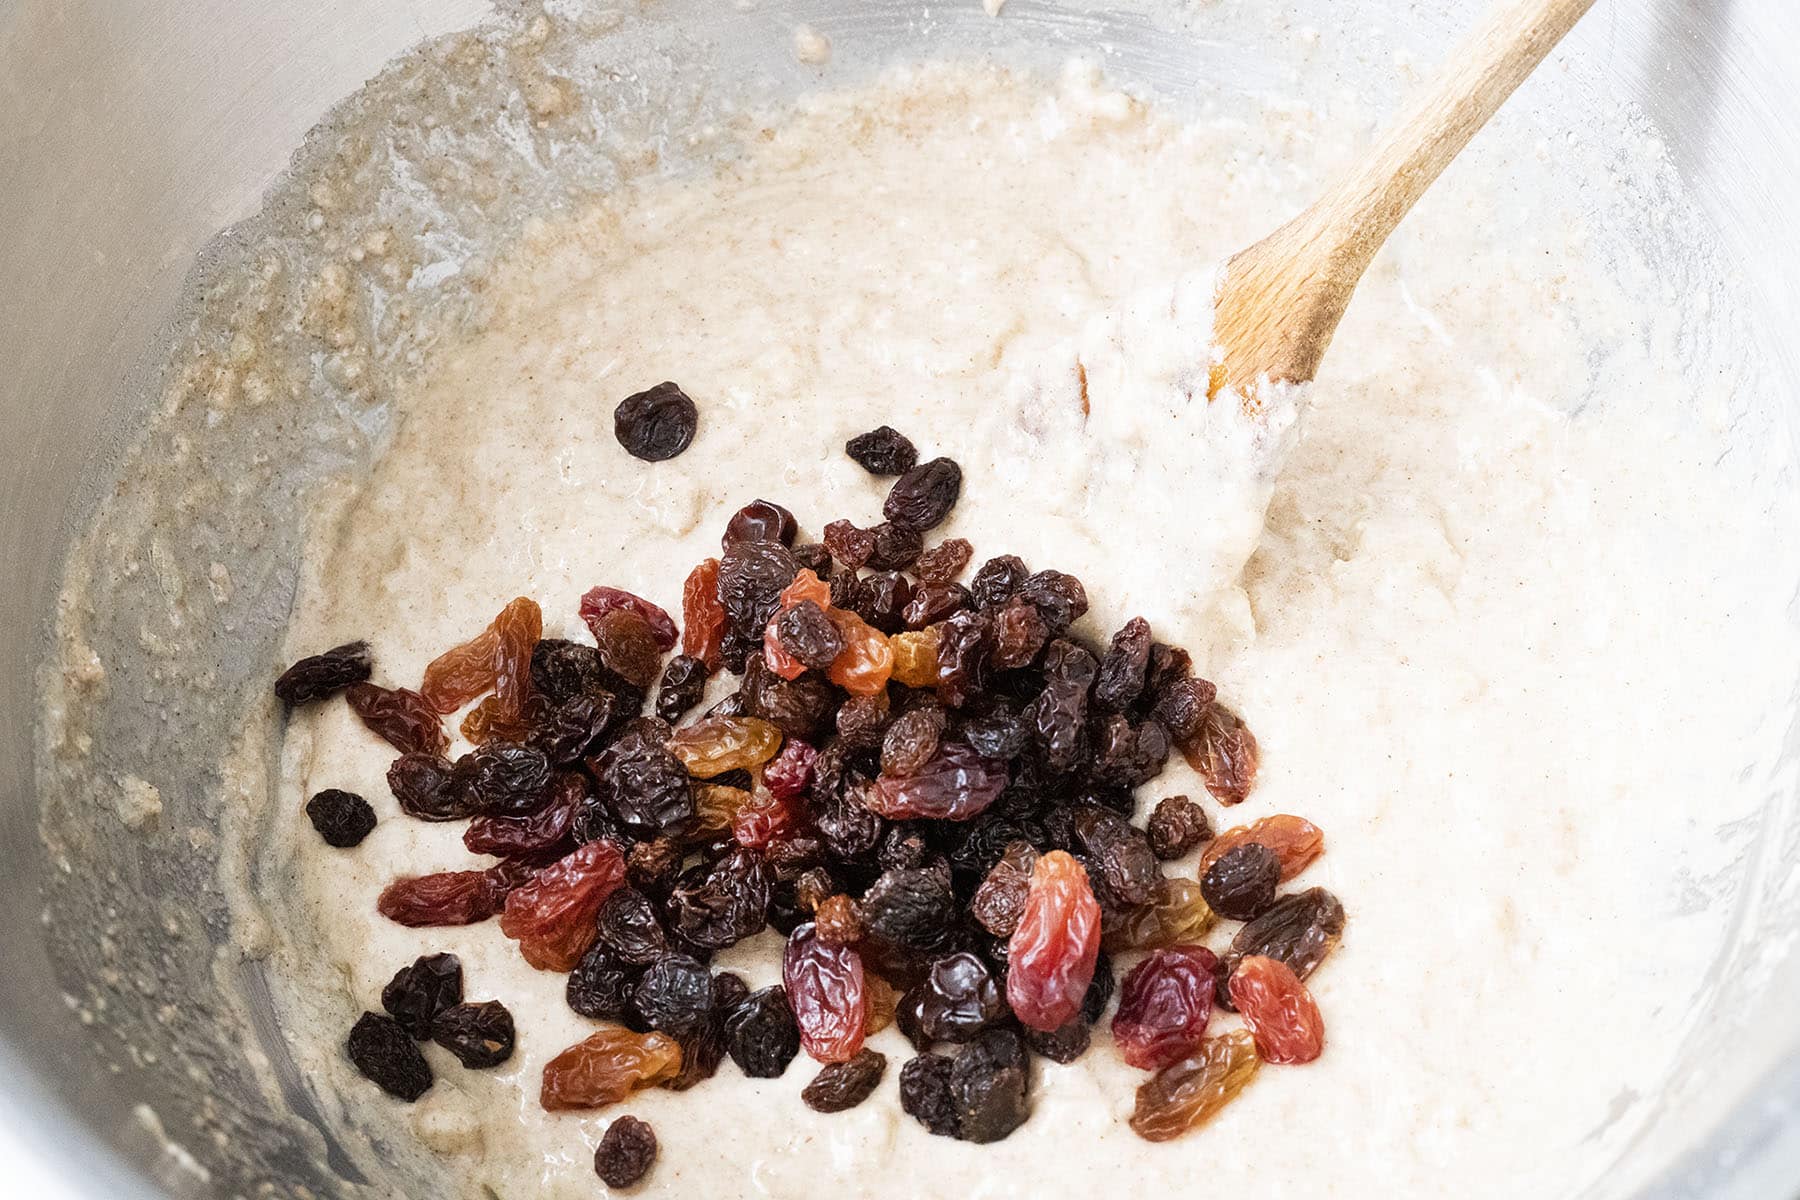 cake mix in bowl with wooden spoon and raisins on top